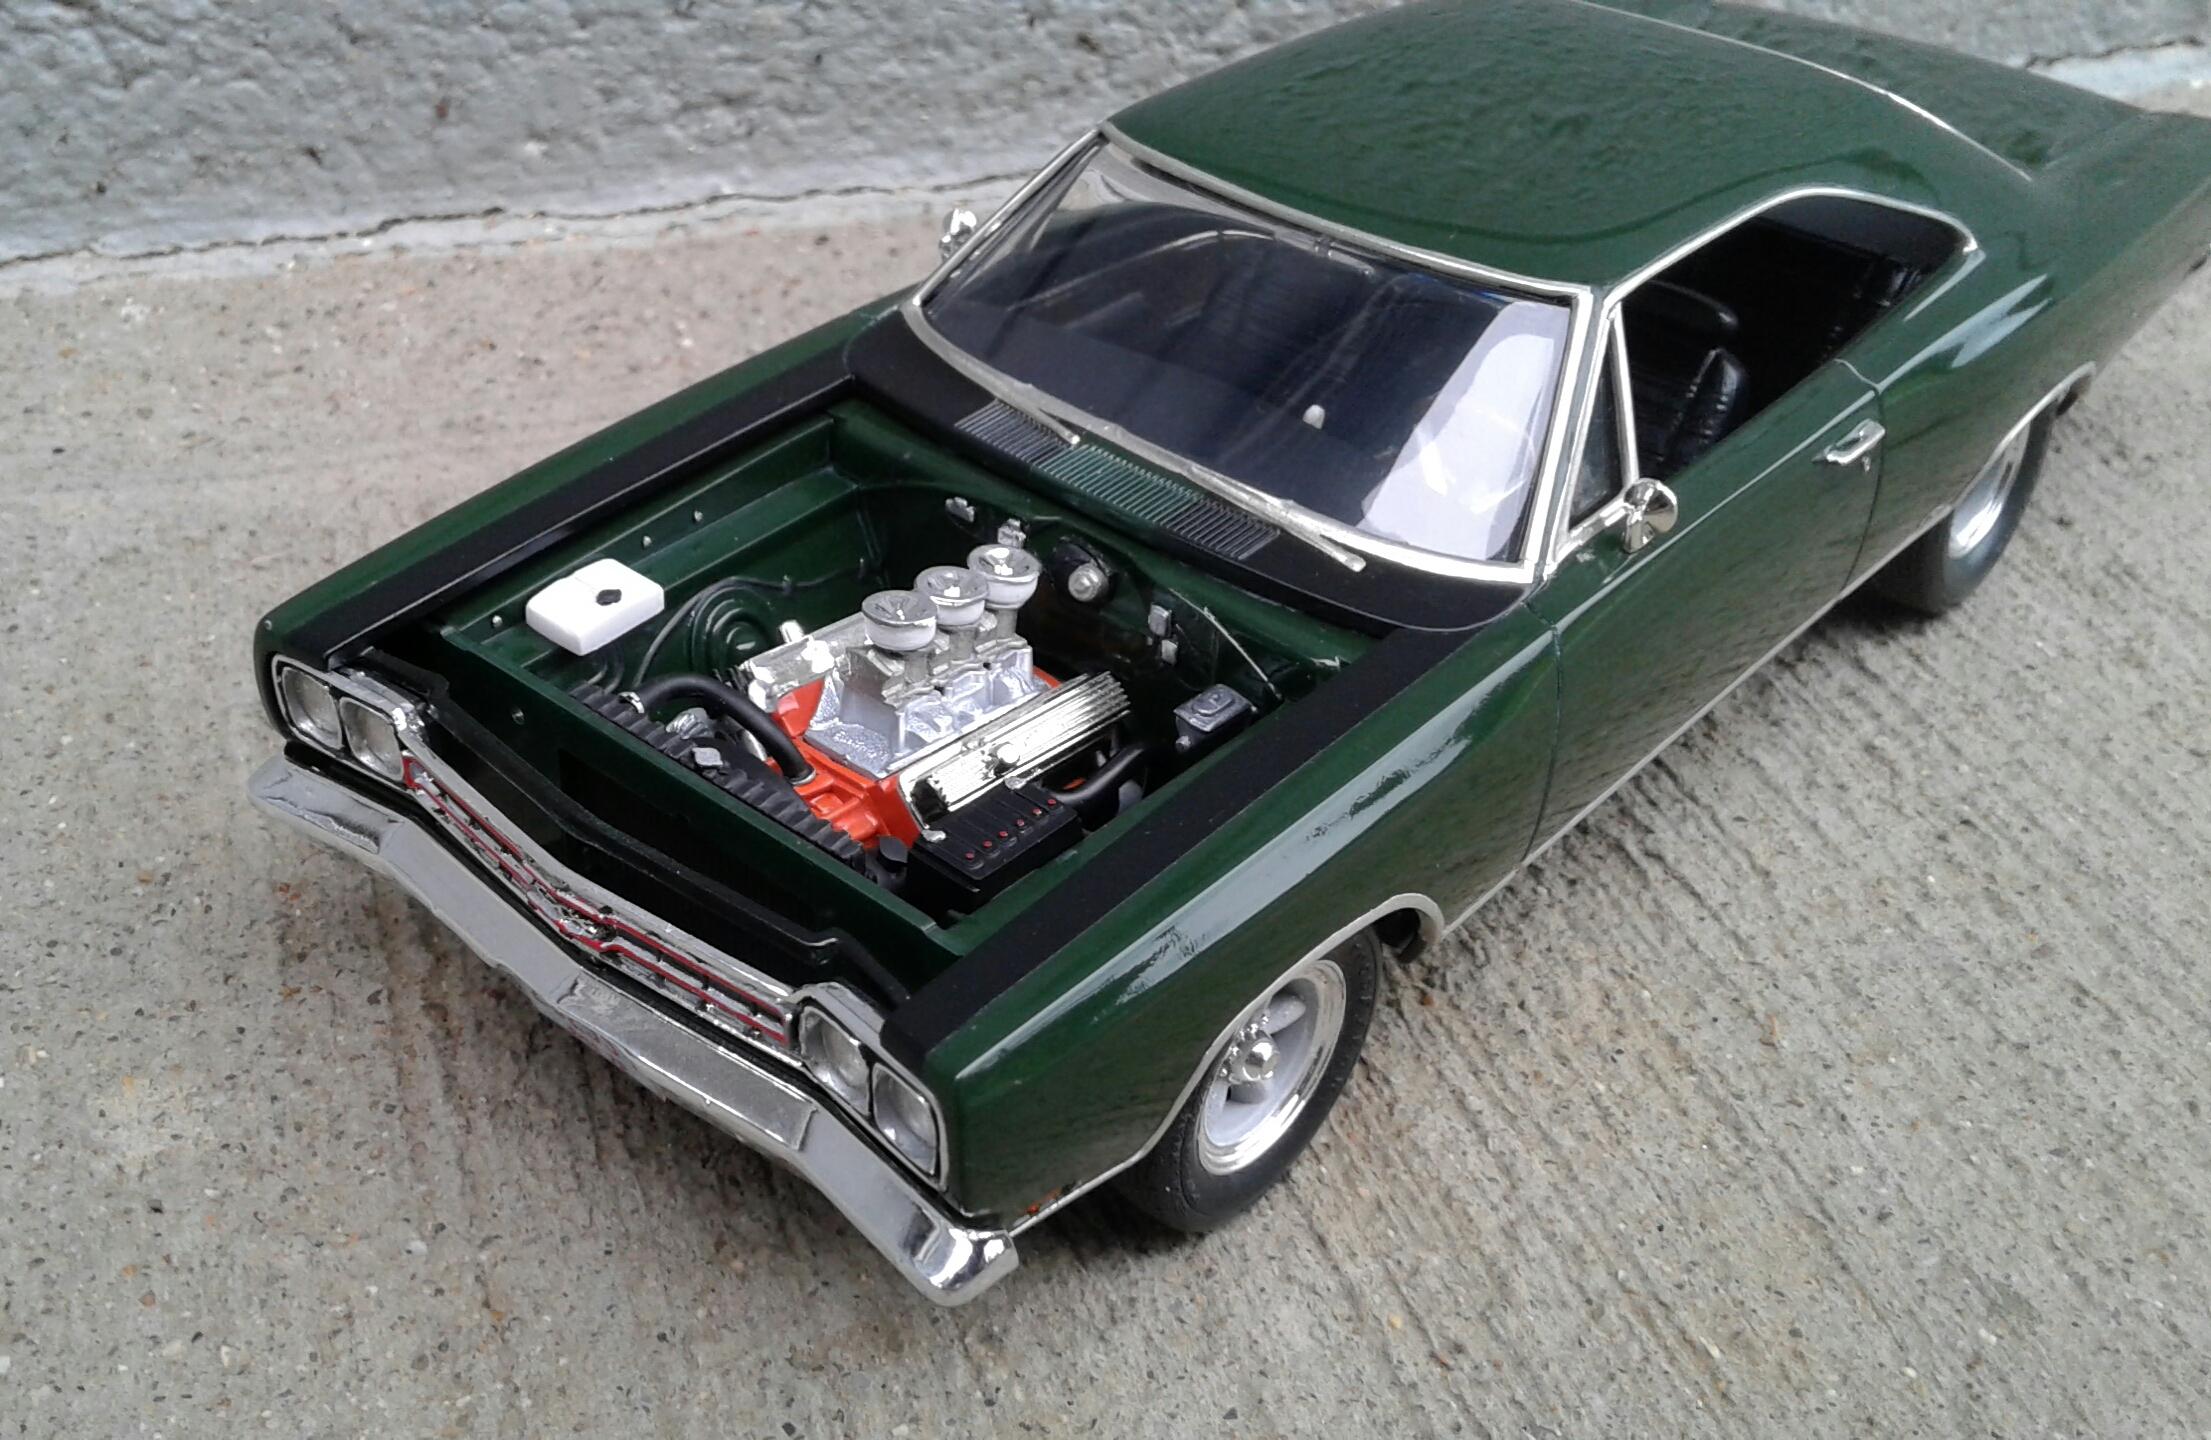 '69 Plymouth GTX Week One Style - Model Cars - Model Cars Magazine Forum